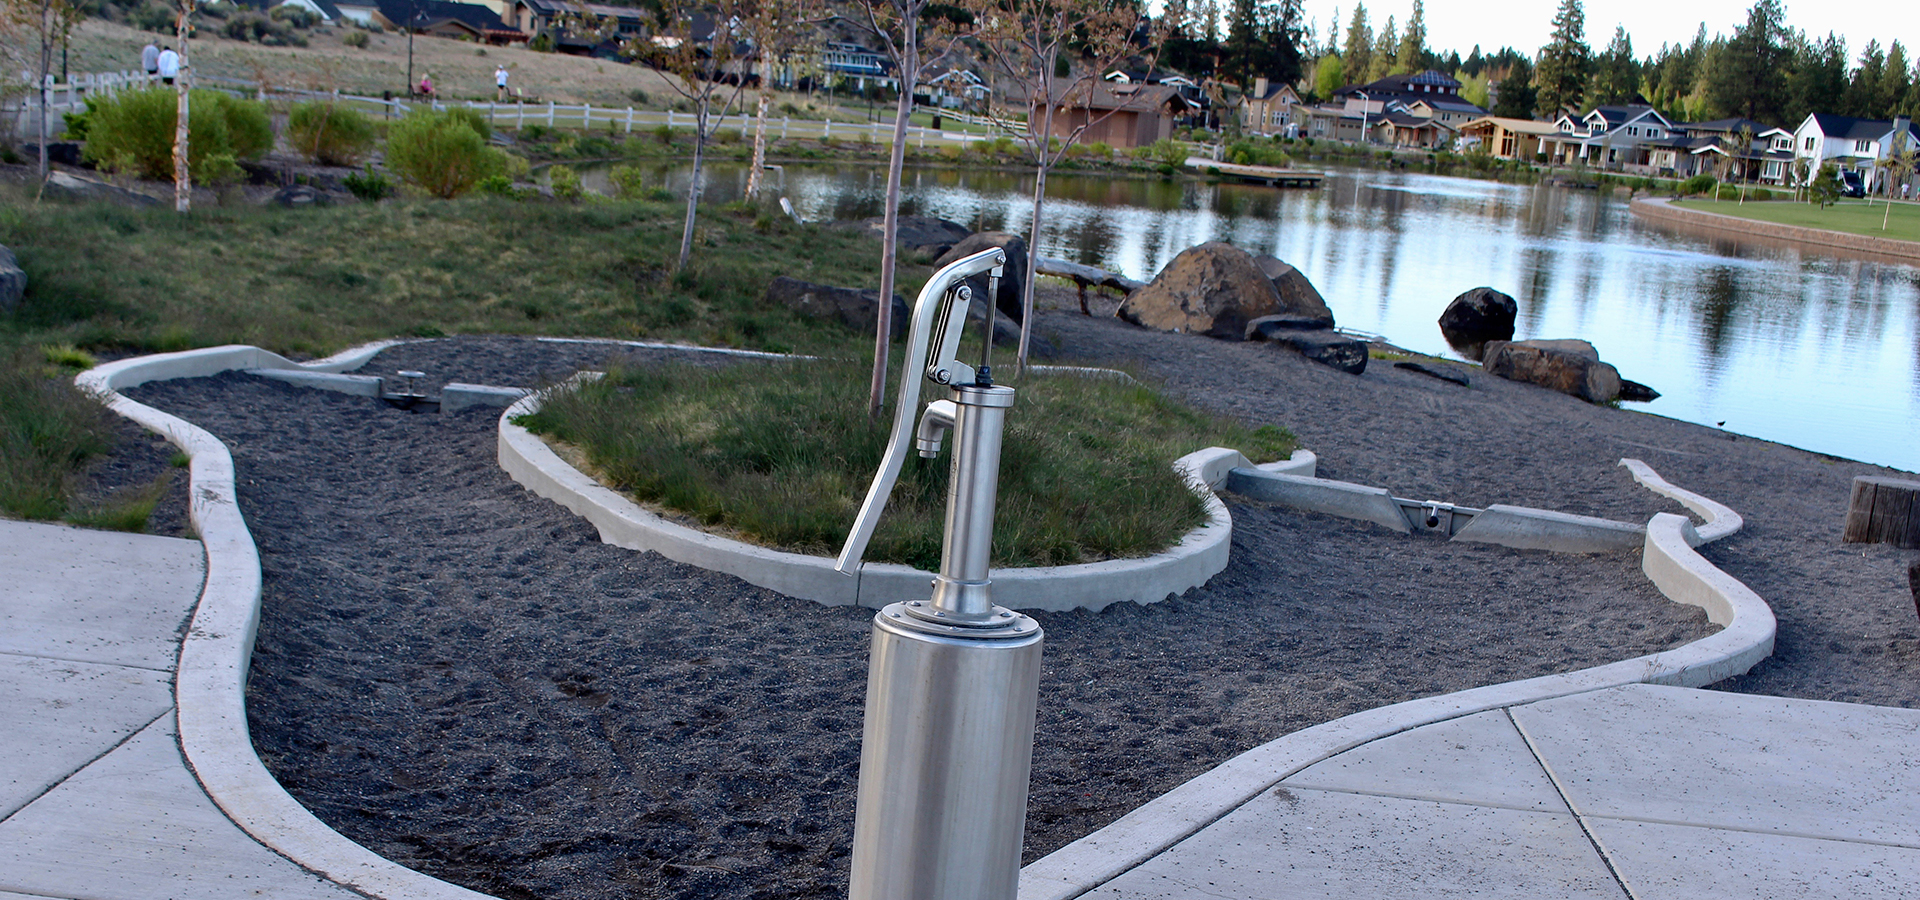 The water play feature at Discovery Park.